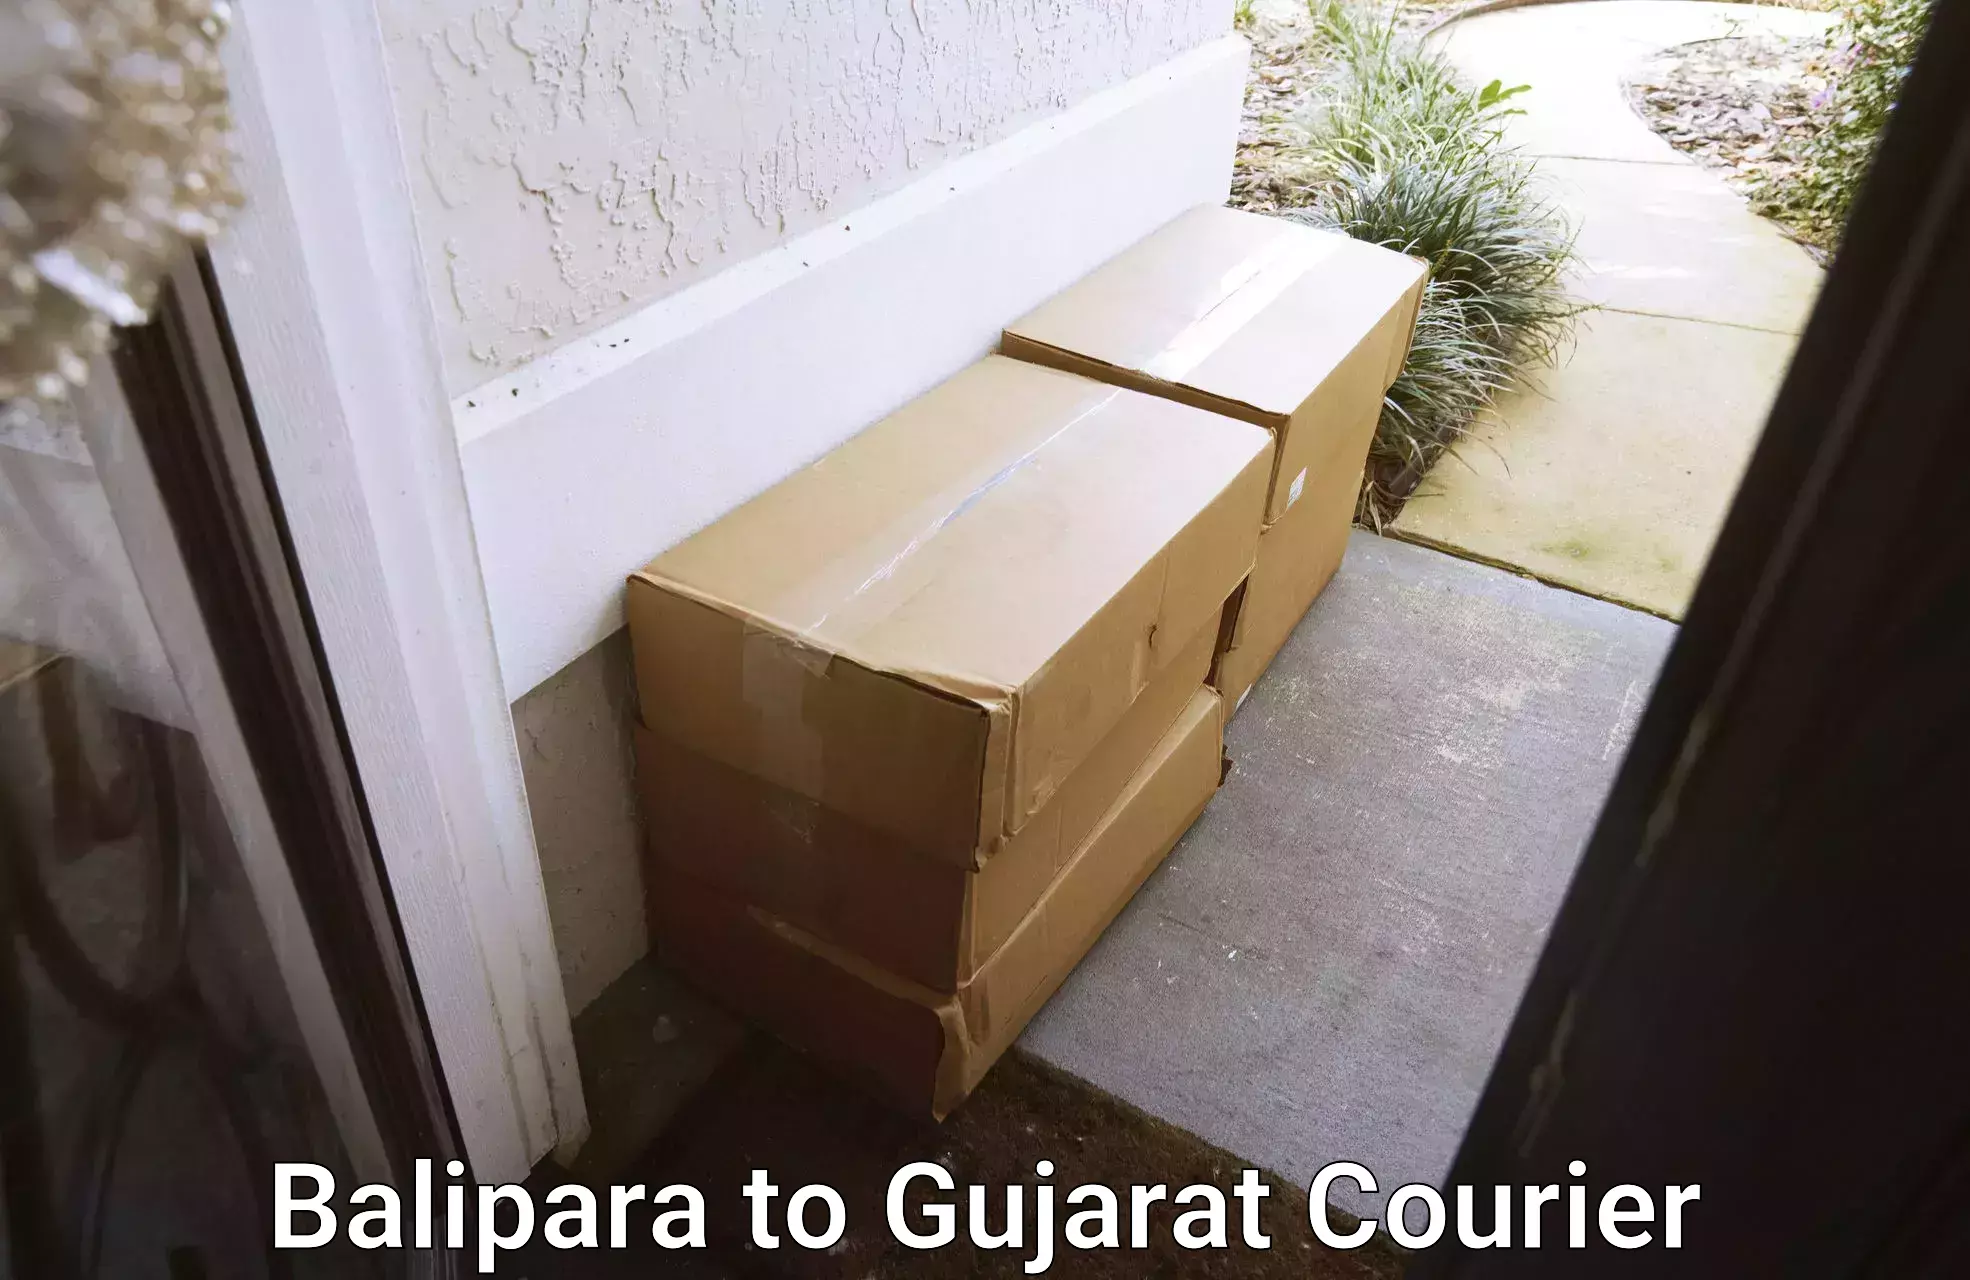 Overnight delivery services Balipara to Tharad